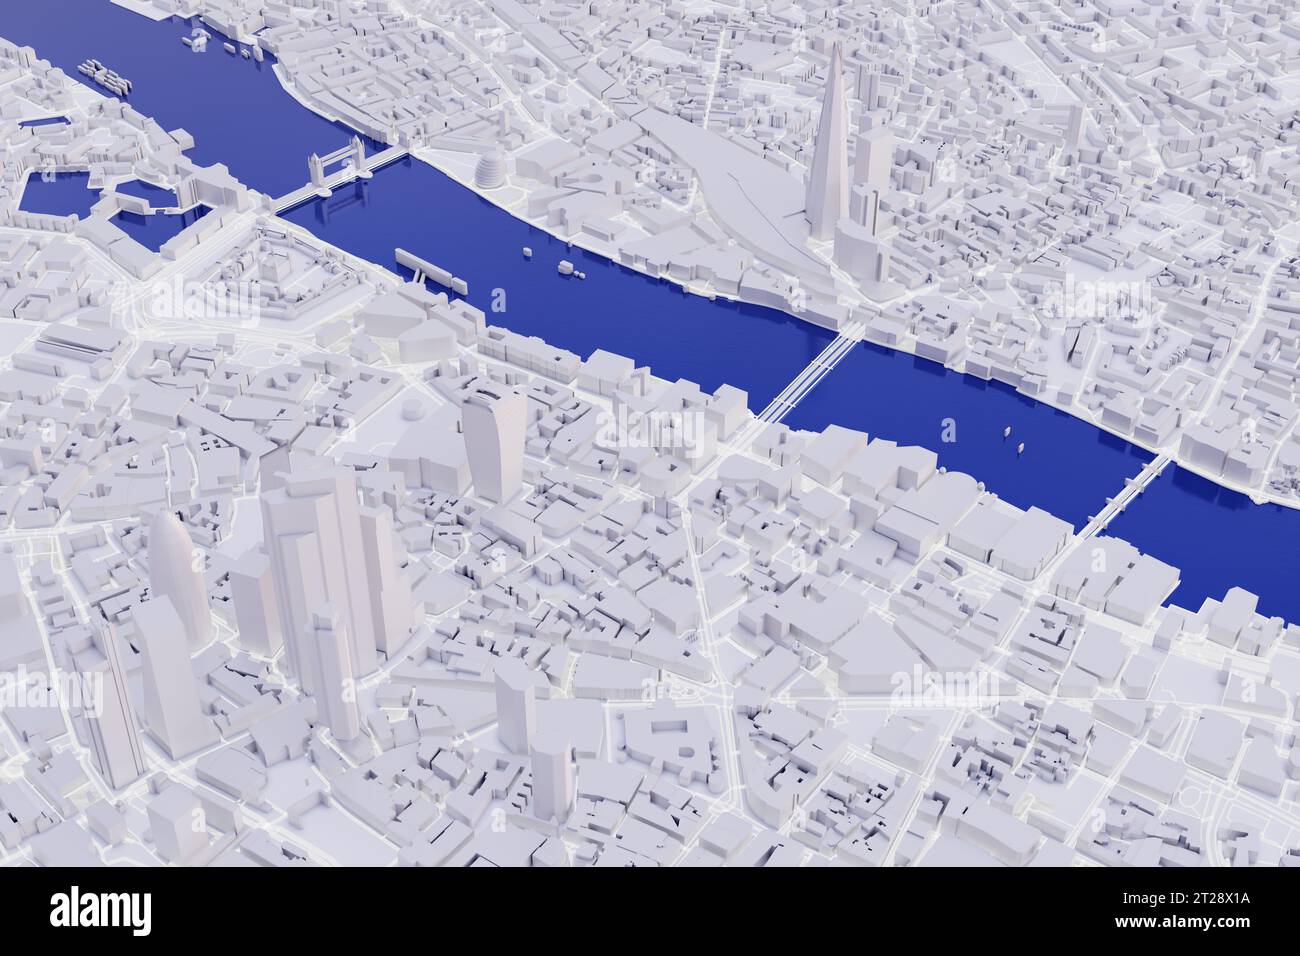 London aerial view of a conceptual low poly city. White 3d buildings with river Thames and popular UK landmarks like Tower Bridge Stock Photo